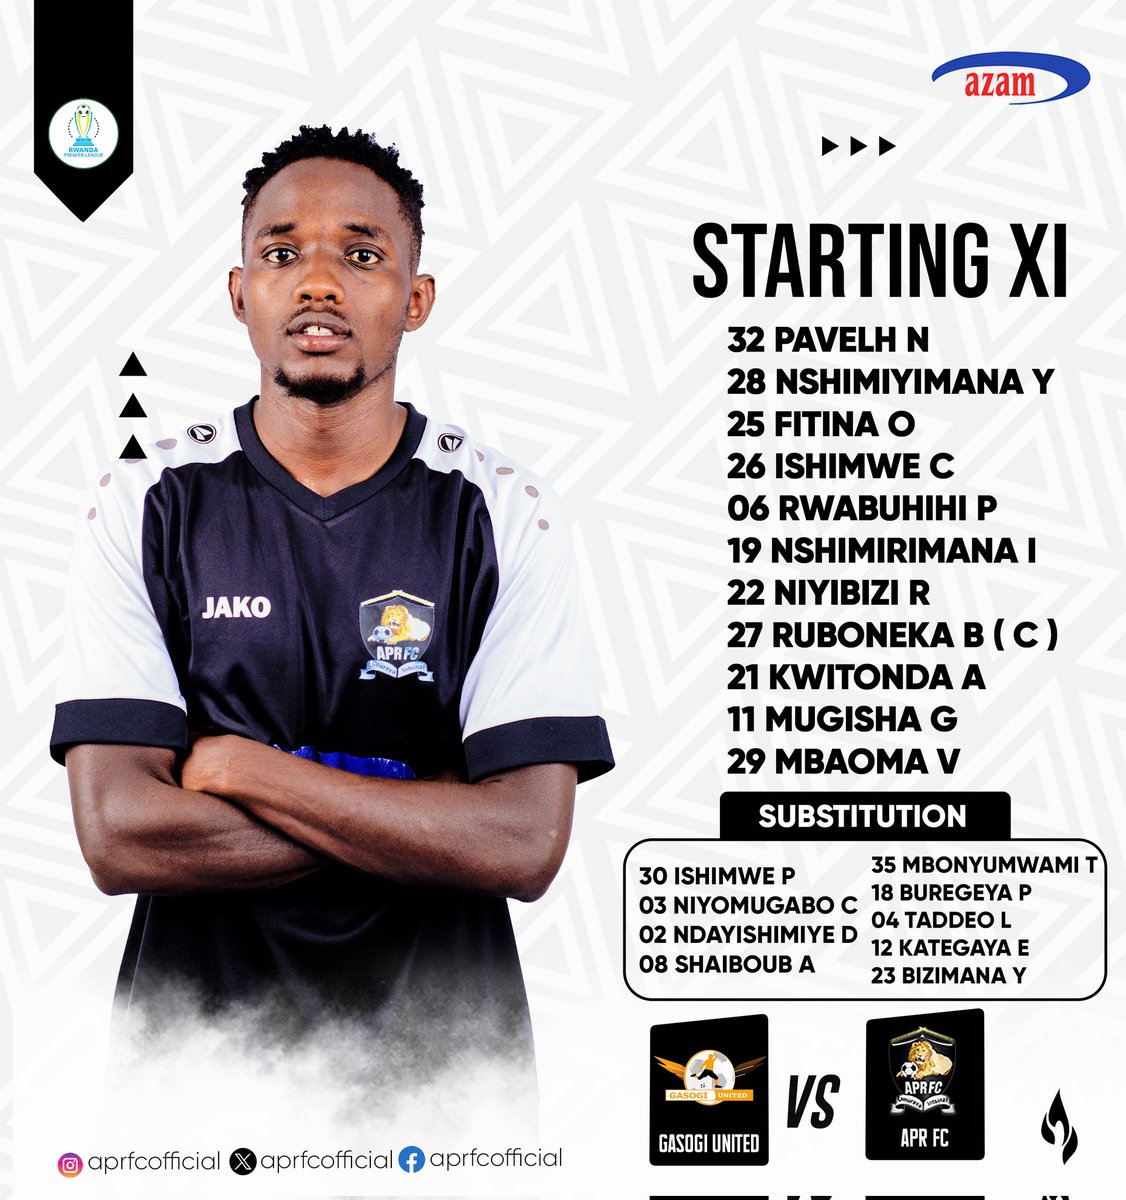 The first 11 snipers to face Gasogi United in just a few hours🦁 #APRFC .